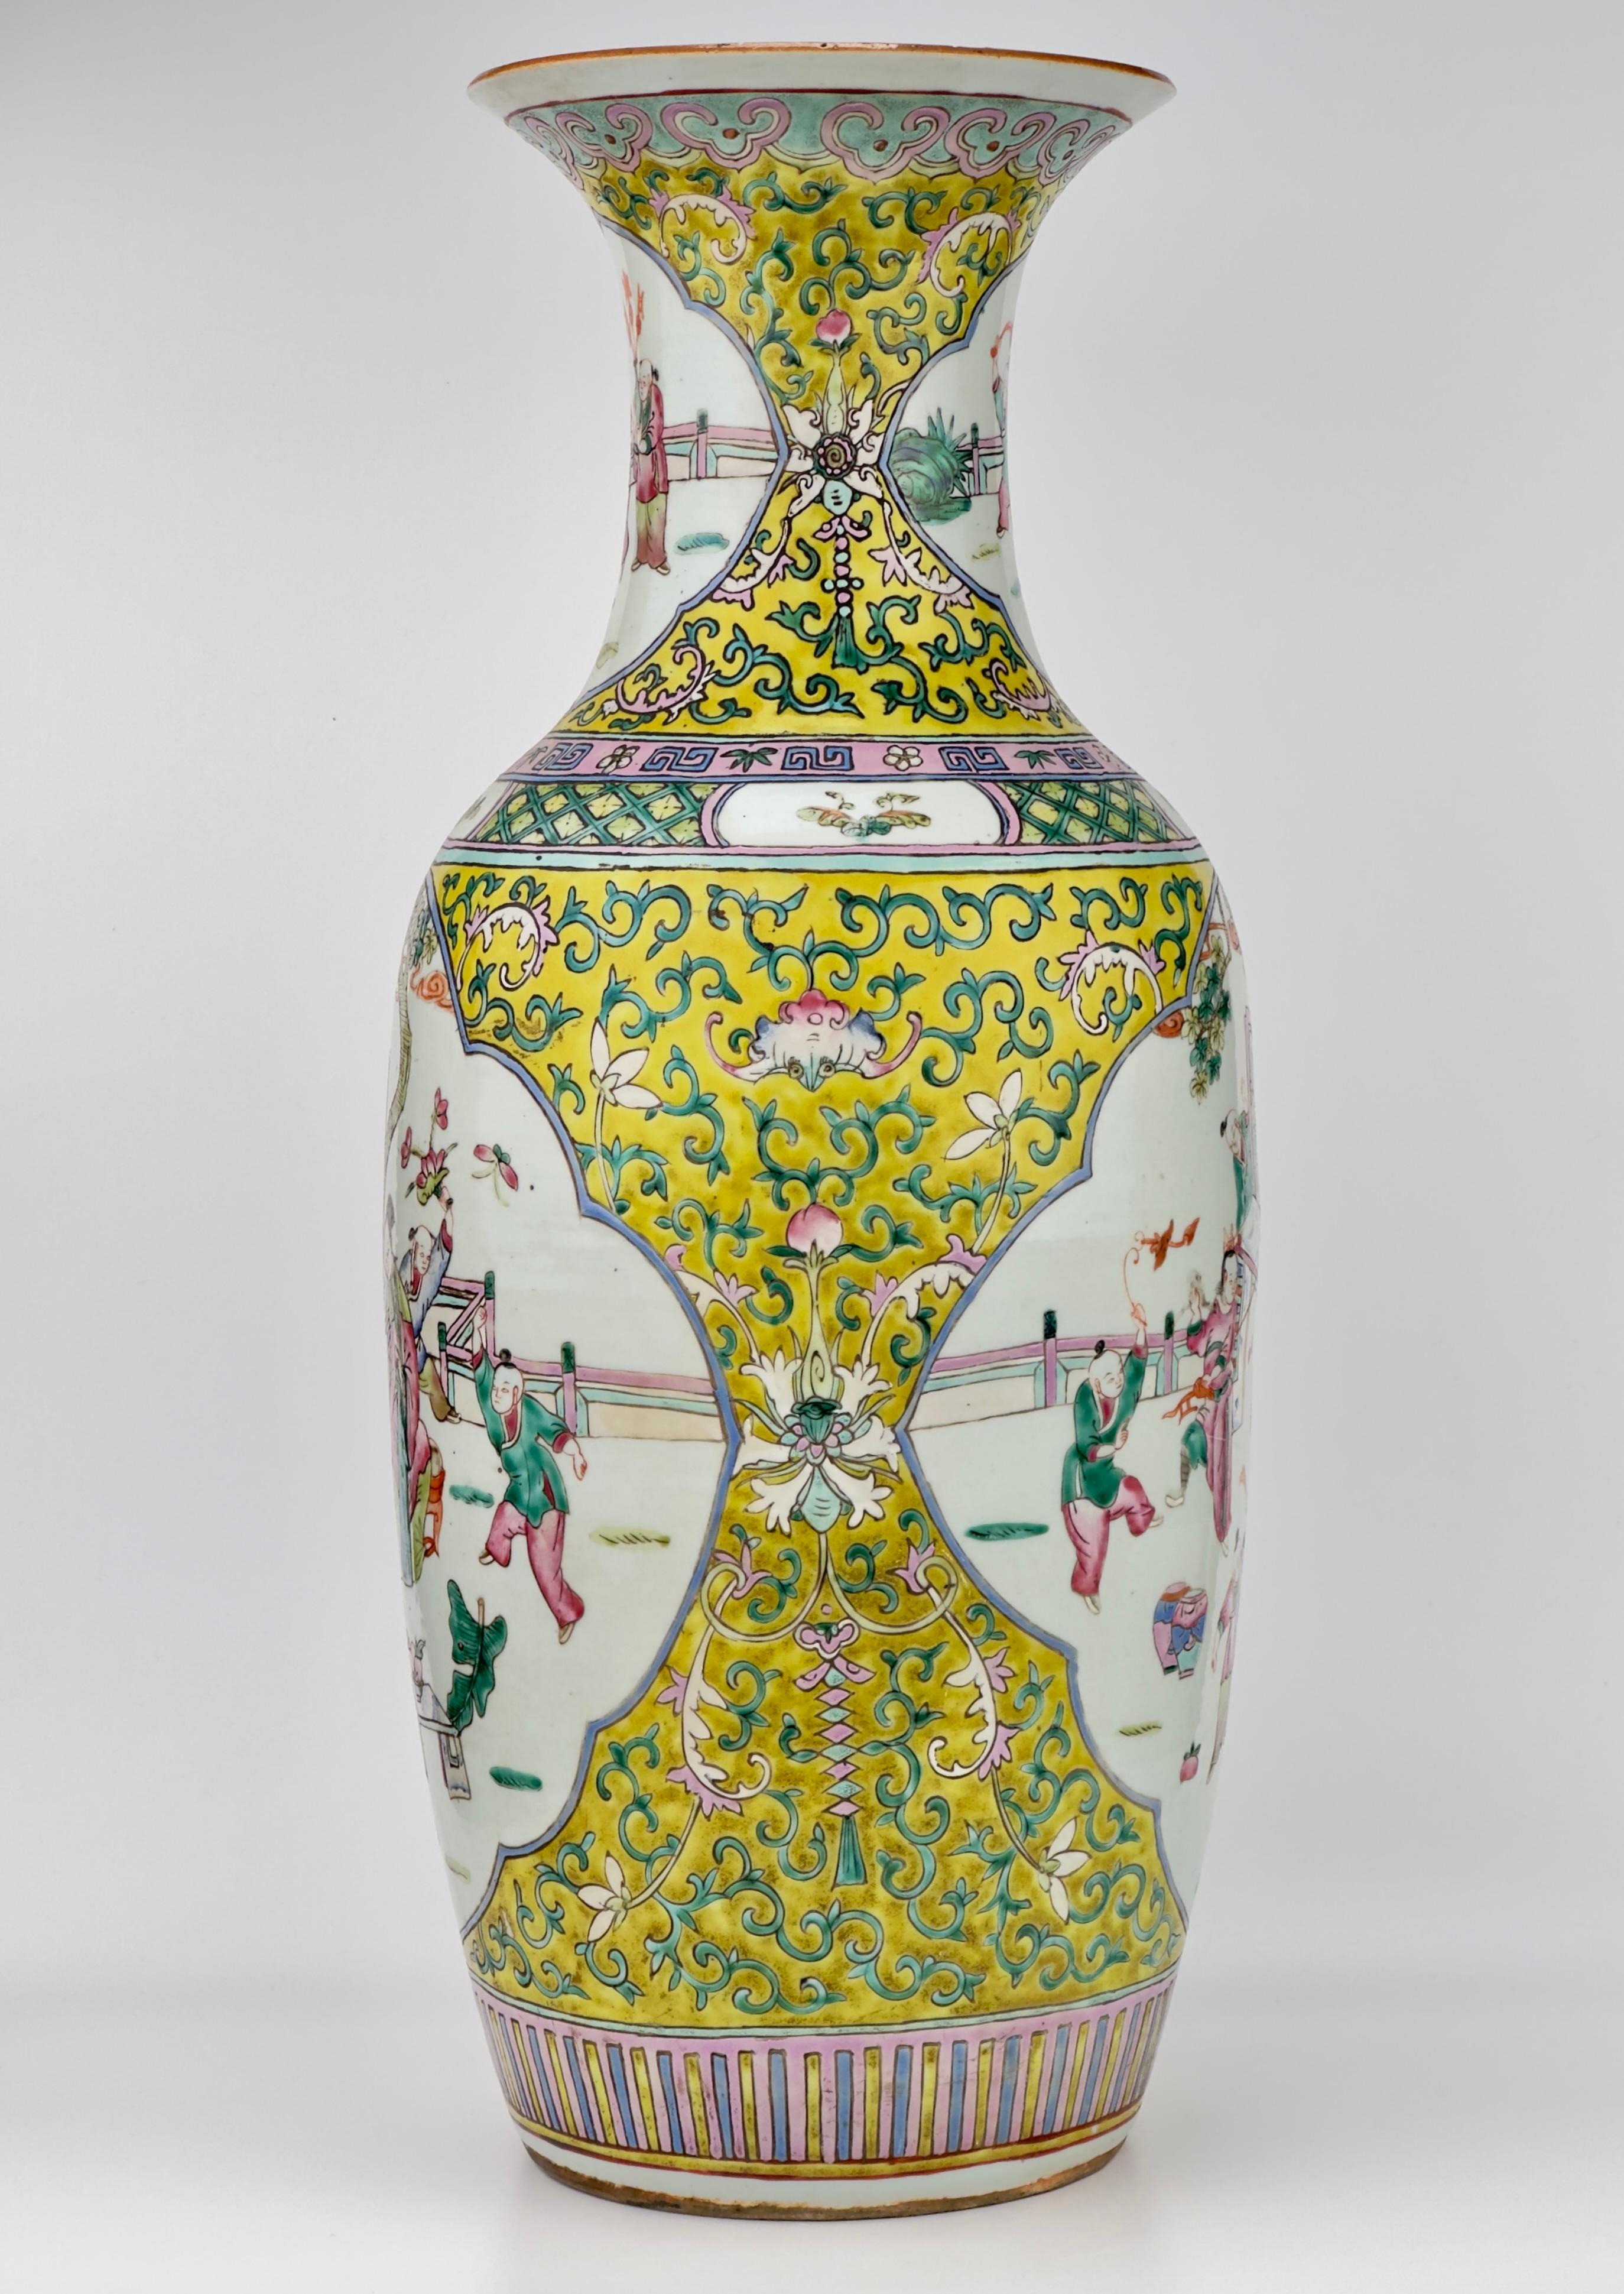 Porcelain painted in overglaze polychrome enamels, yellow ground.

Period: Qing Dynasty(19th century)
Type: Vase
Medium: Famille rose
Size : 58cm(Height) x 19.5cm(Mouth Diameter)
Condition: Excellent(Fading on surface with traces of use)
Reference